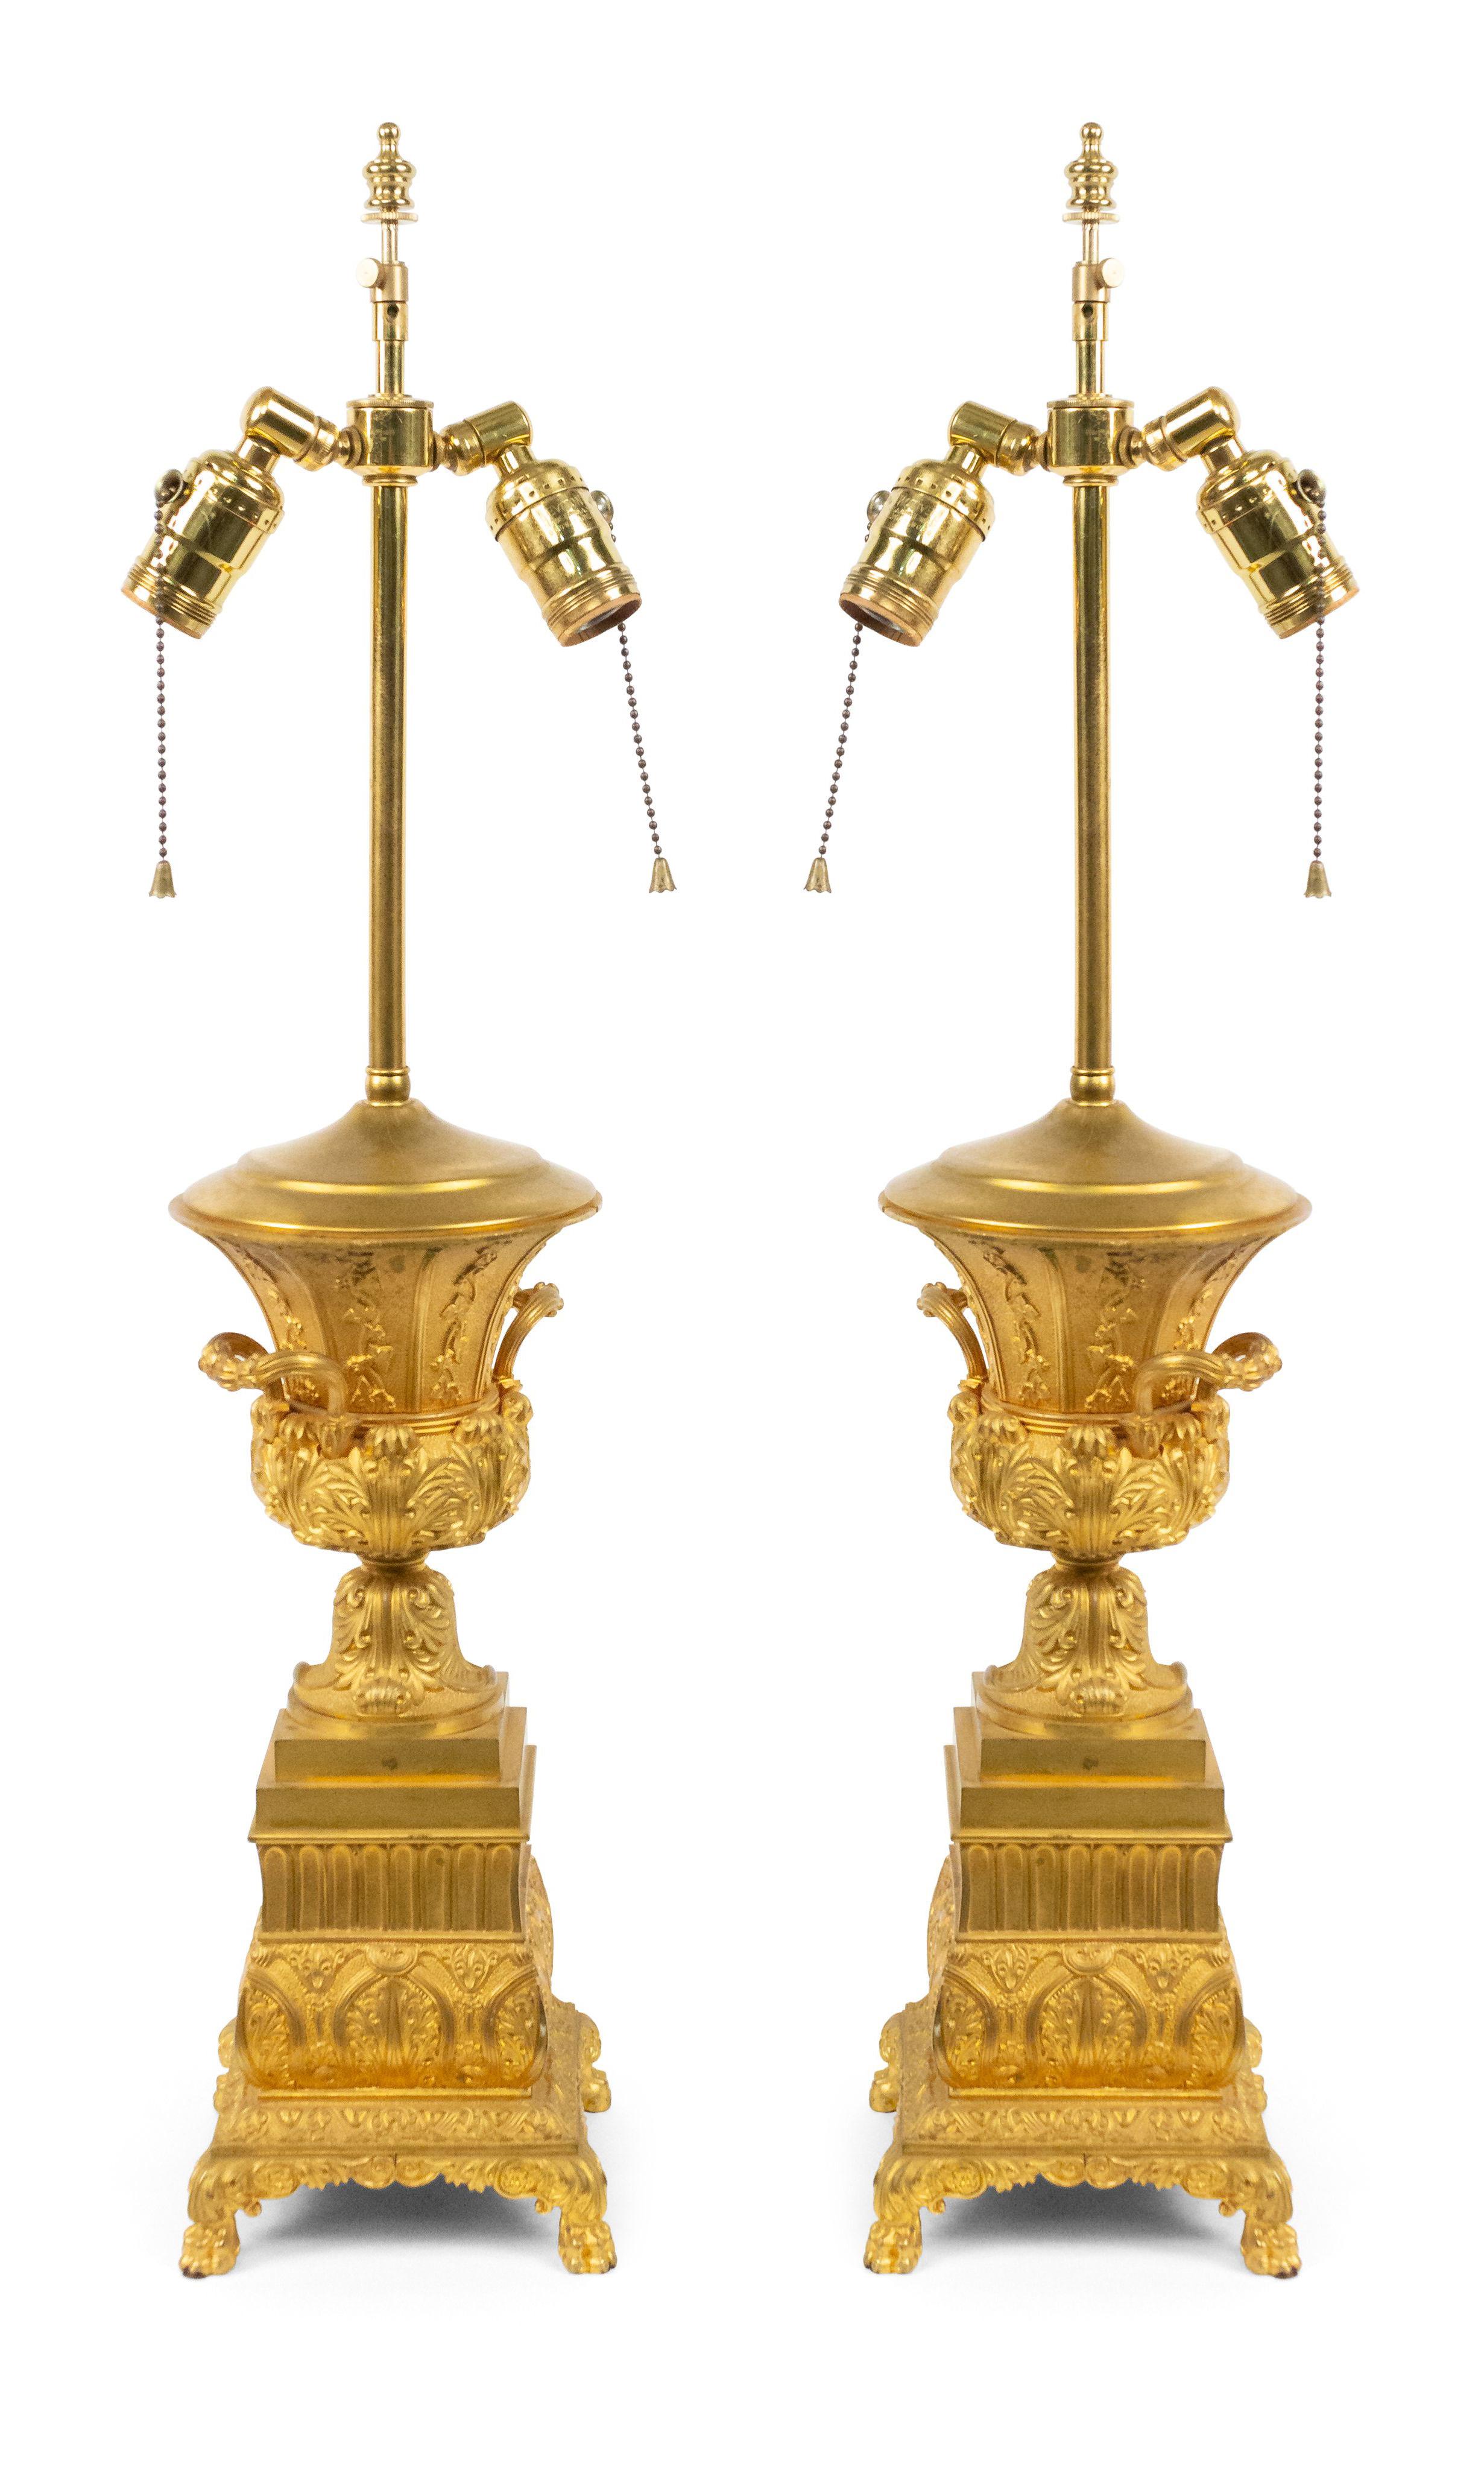 Pair of French Charles X (19th Century) bronze dore urns mounted as table lamps with side handles (PRICED AS Pair).
